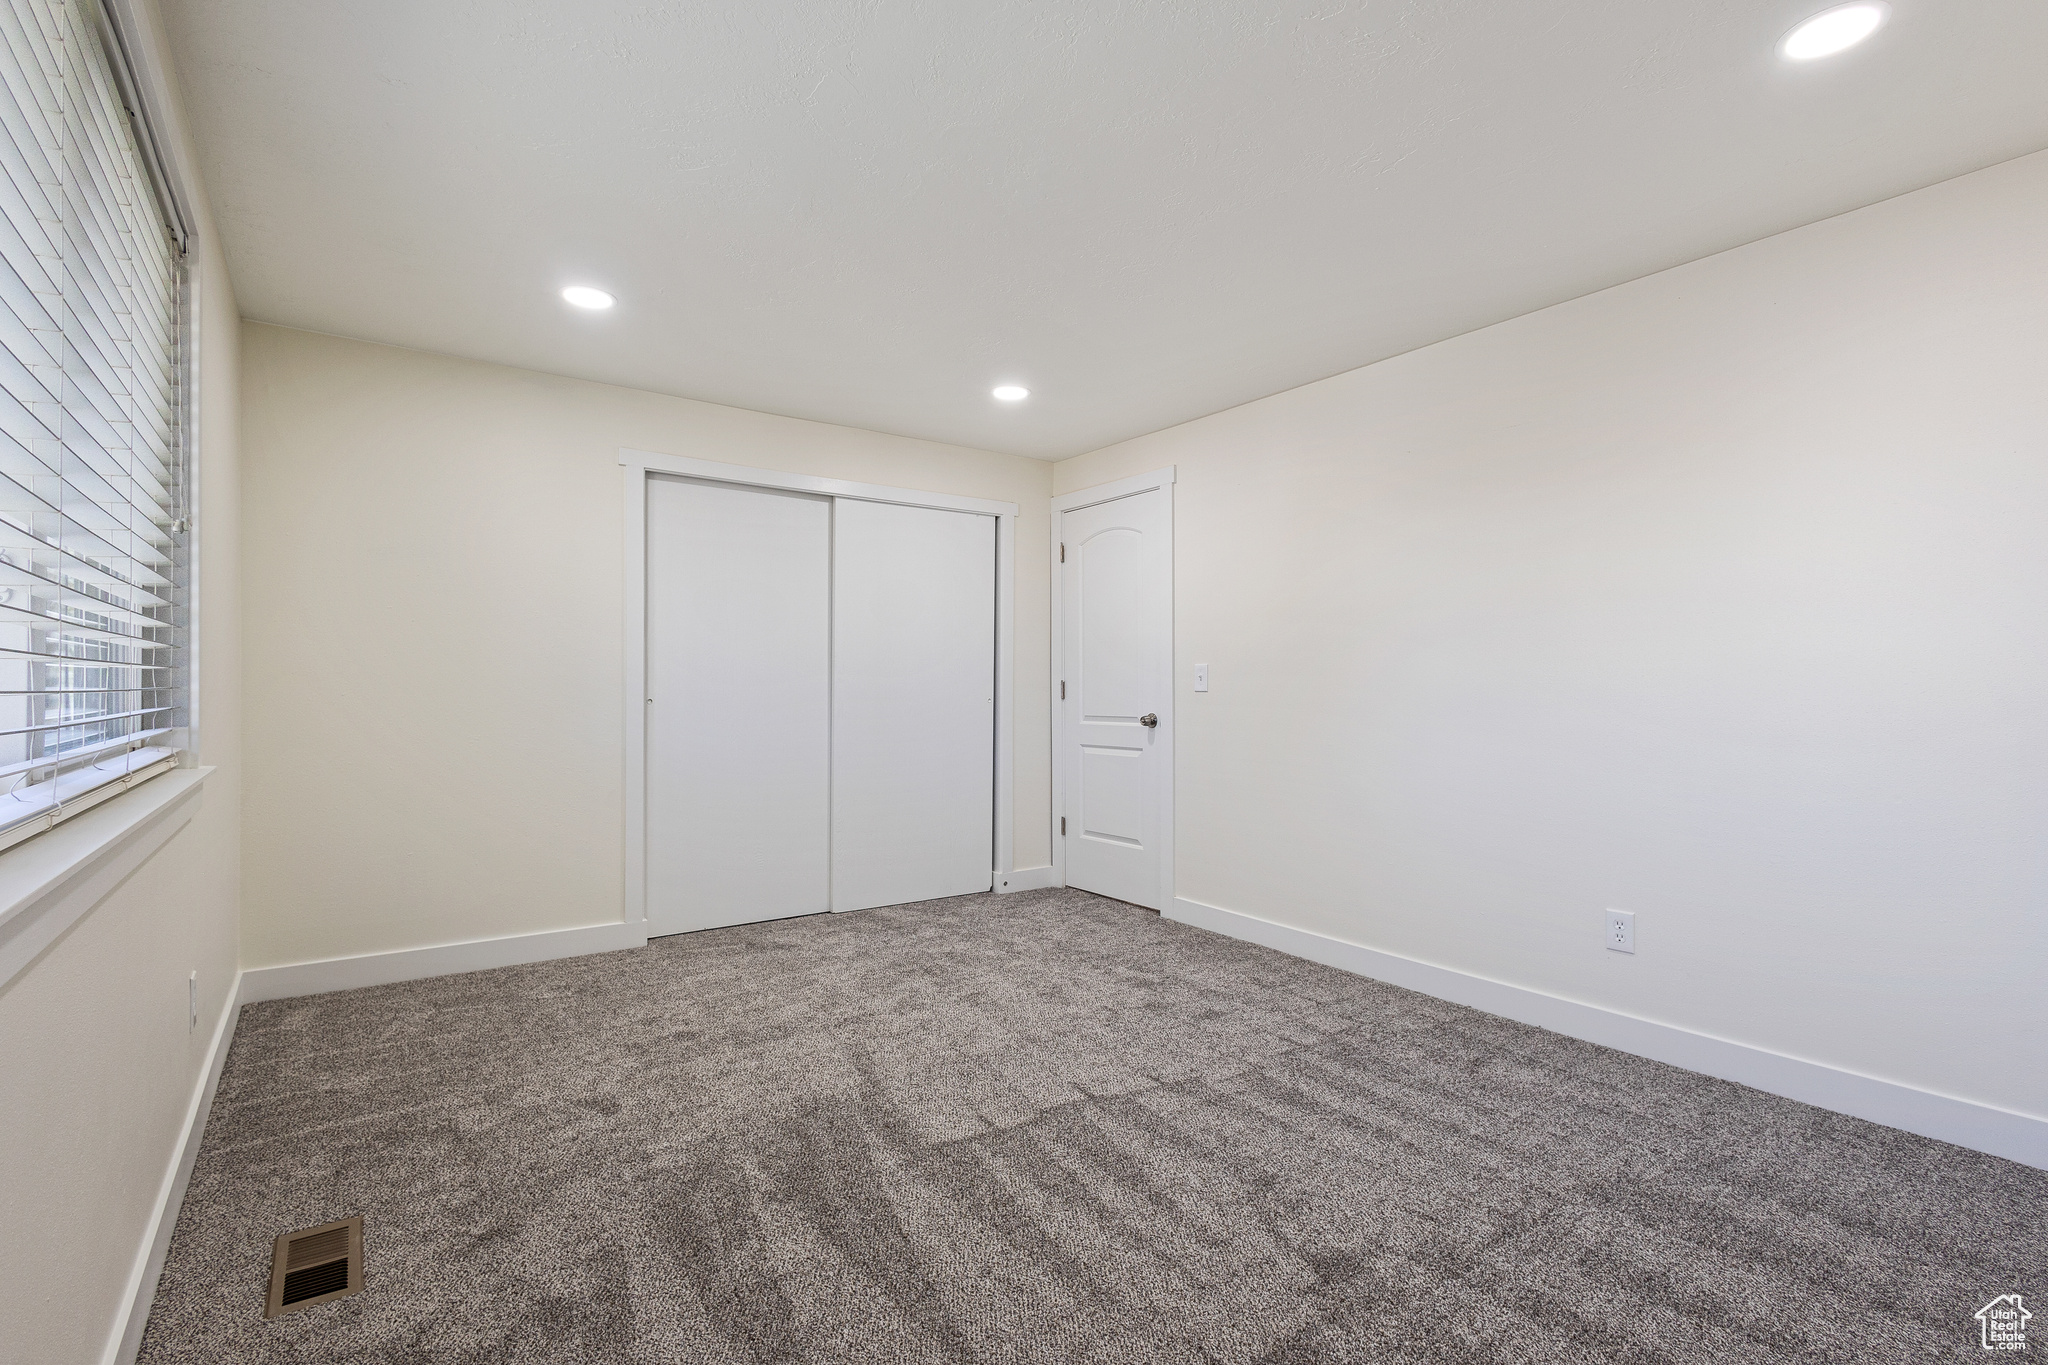 Carpeted Bedroom featuring a textured ceiling and new carpet